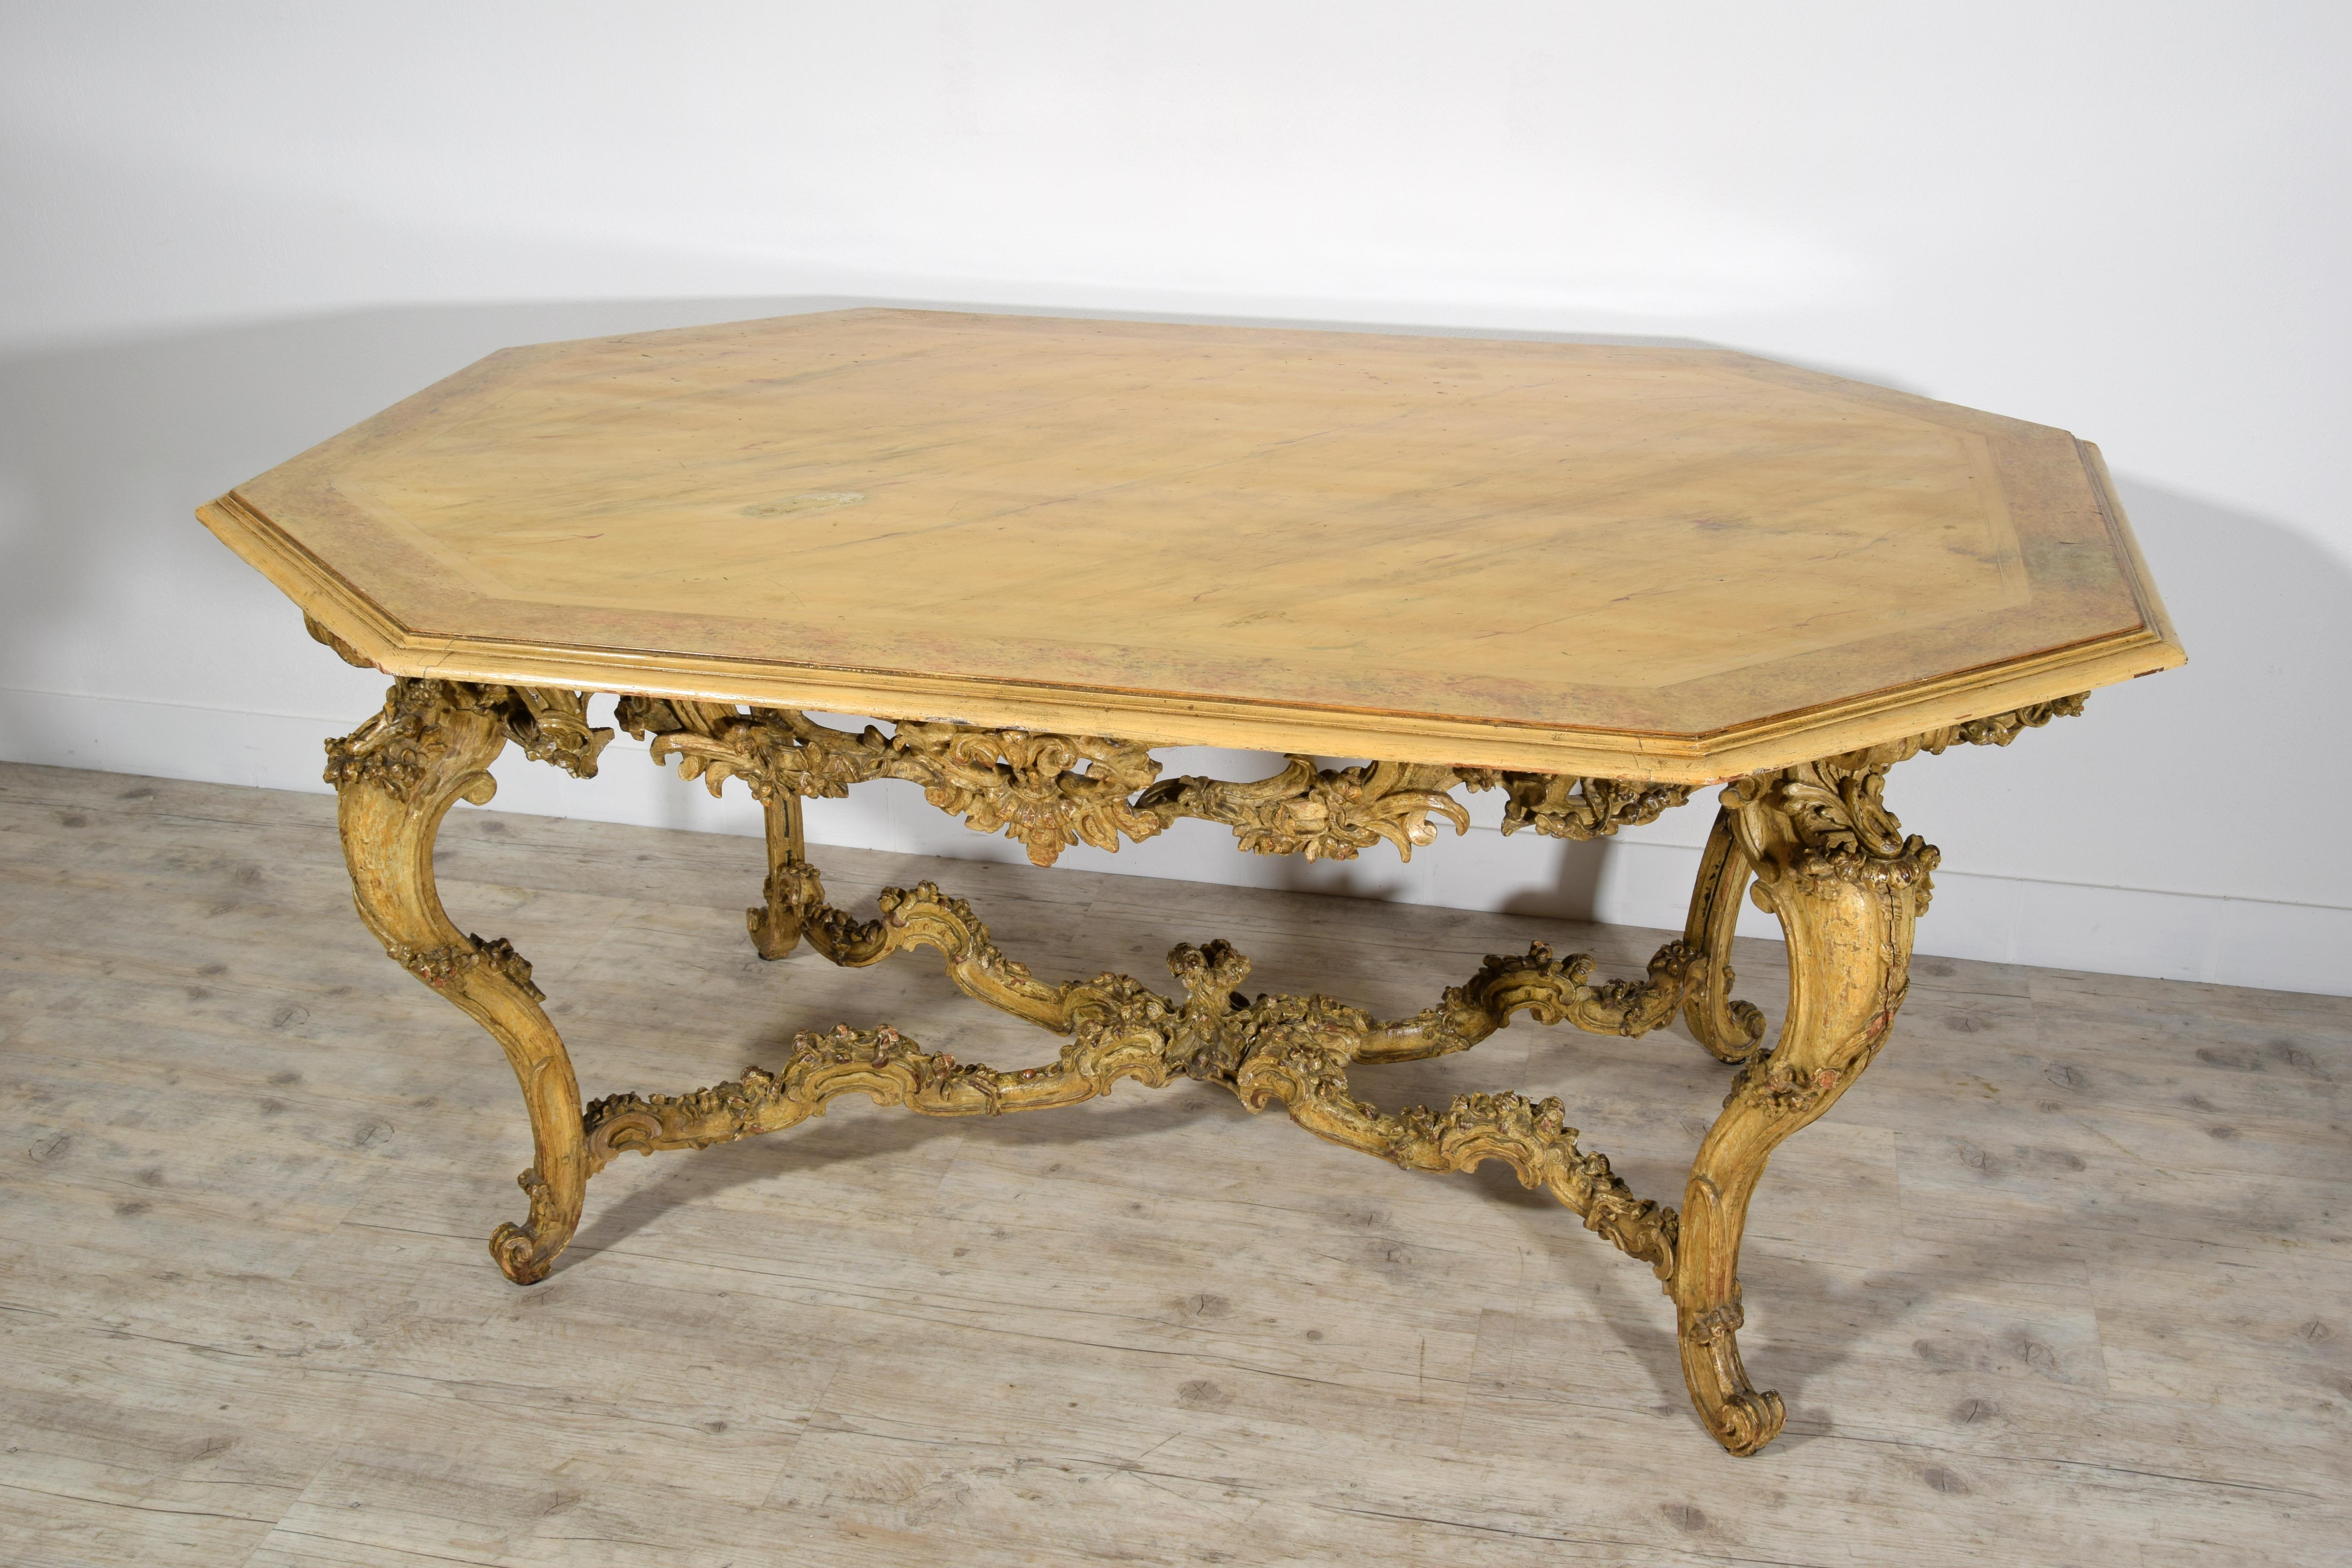 Italian Baroque Carved Gilt and Lacquered Wood Center Table, 18th Century For Sale 4